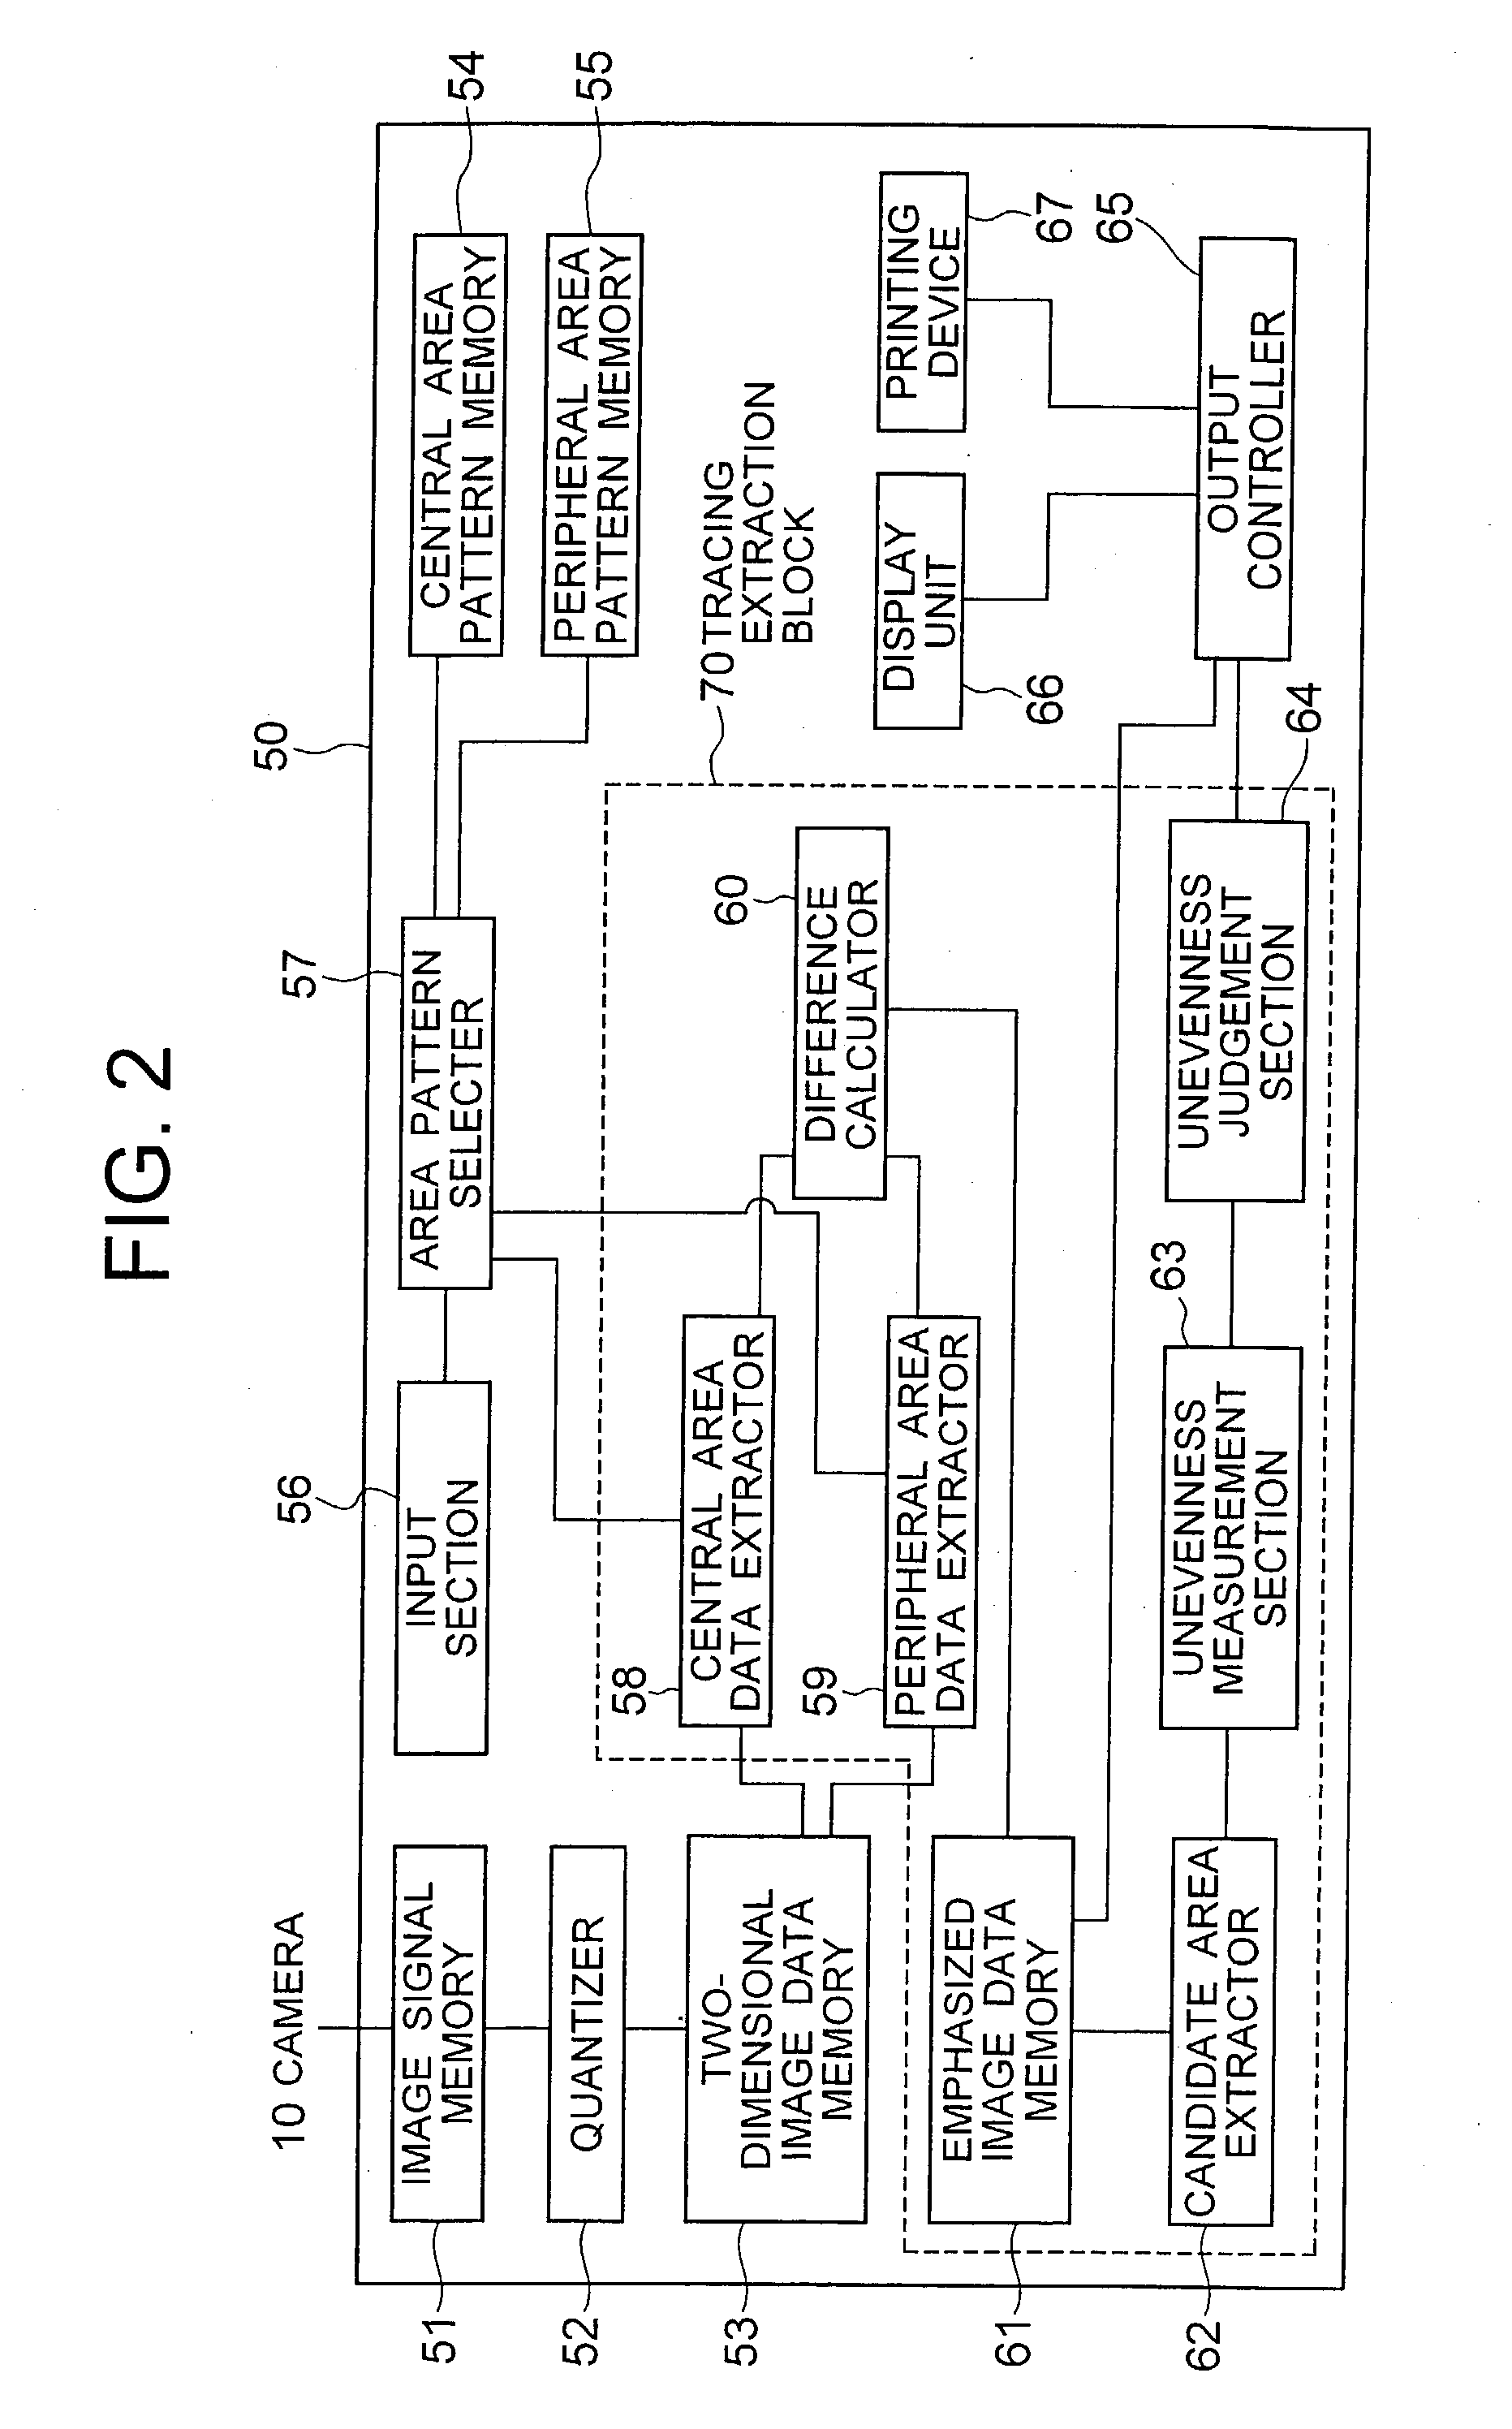 Image data processing unit for use in a visual inspection device